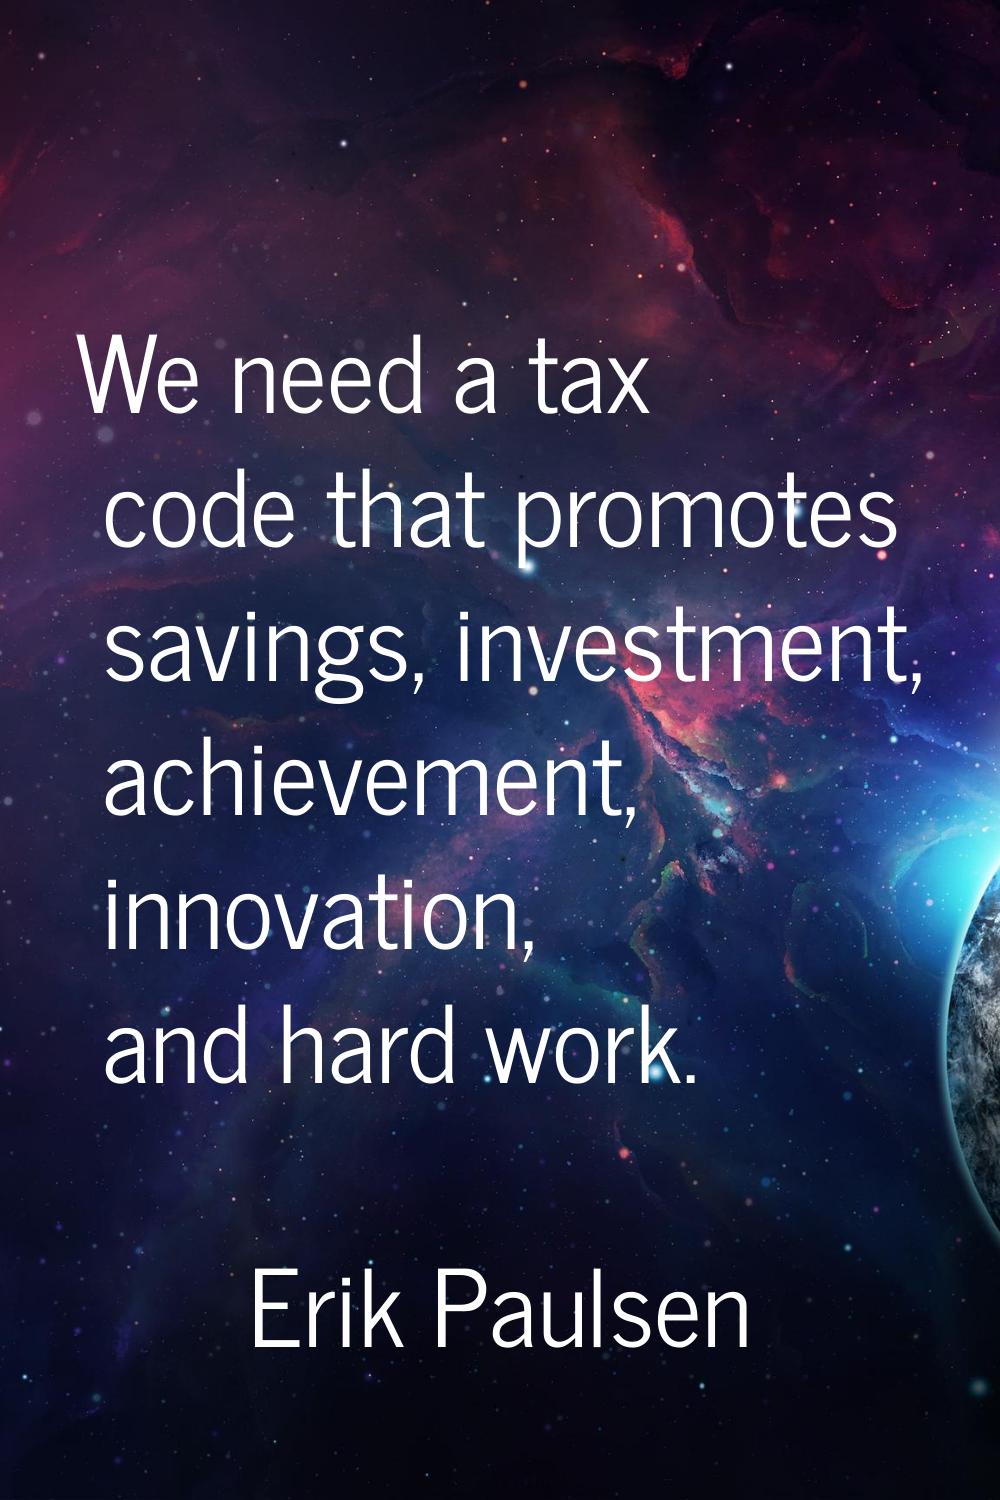 We need a tax code that promotes savings, investment, achievement, innovation, and hard work.